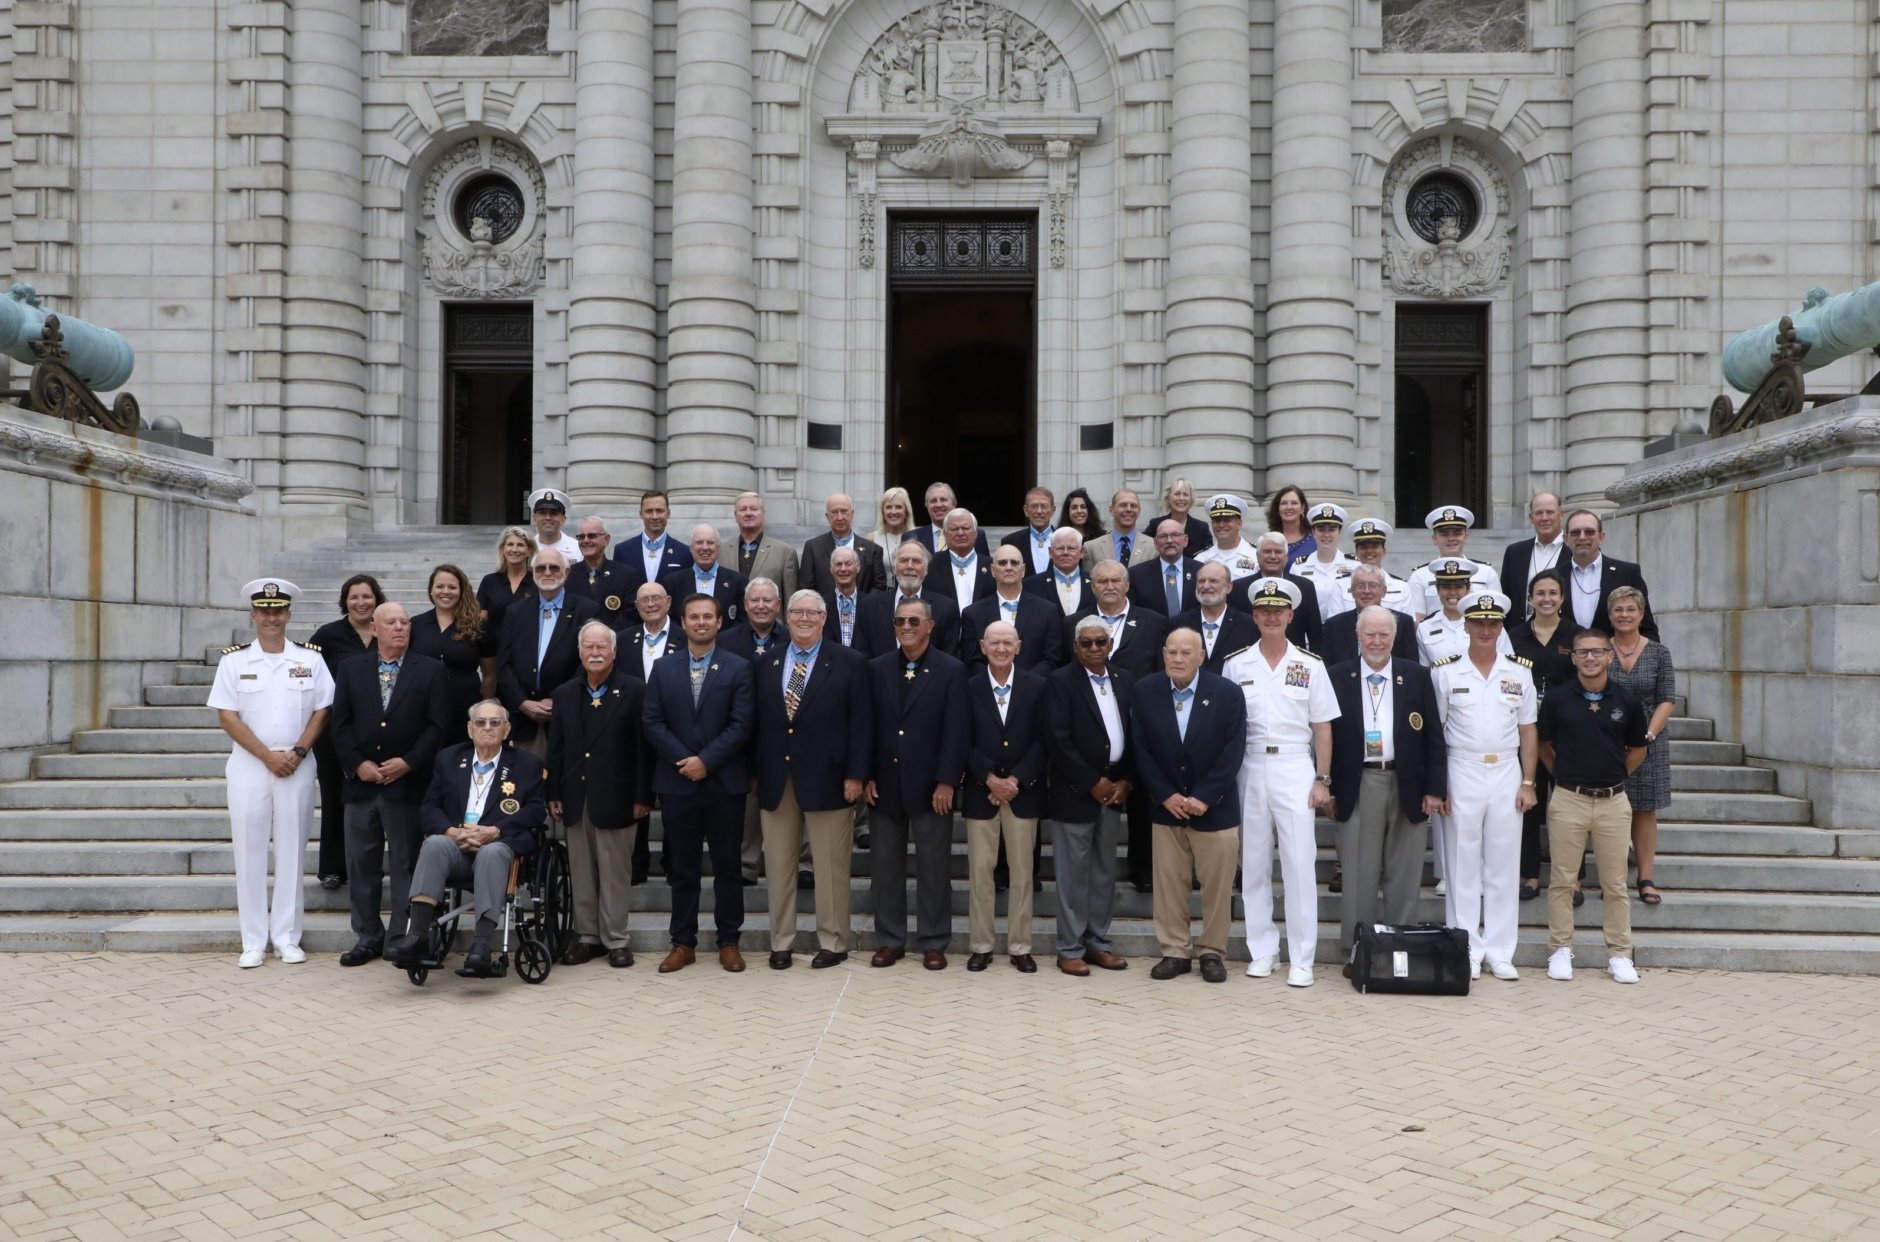 Group photo of Congressional Medal of Honor recipients gathering for their annual convention. This the first year the event is being held in Annapolis. (Courtesy Shmulik Almany/Congressional Medal of Honor Society)